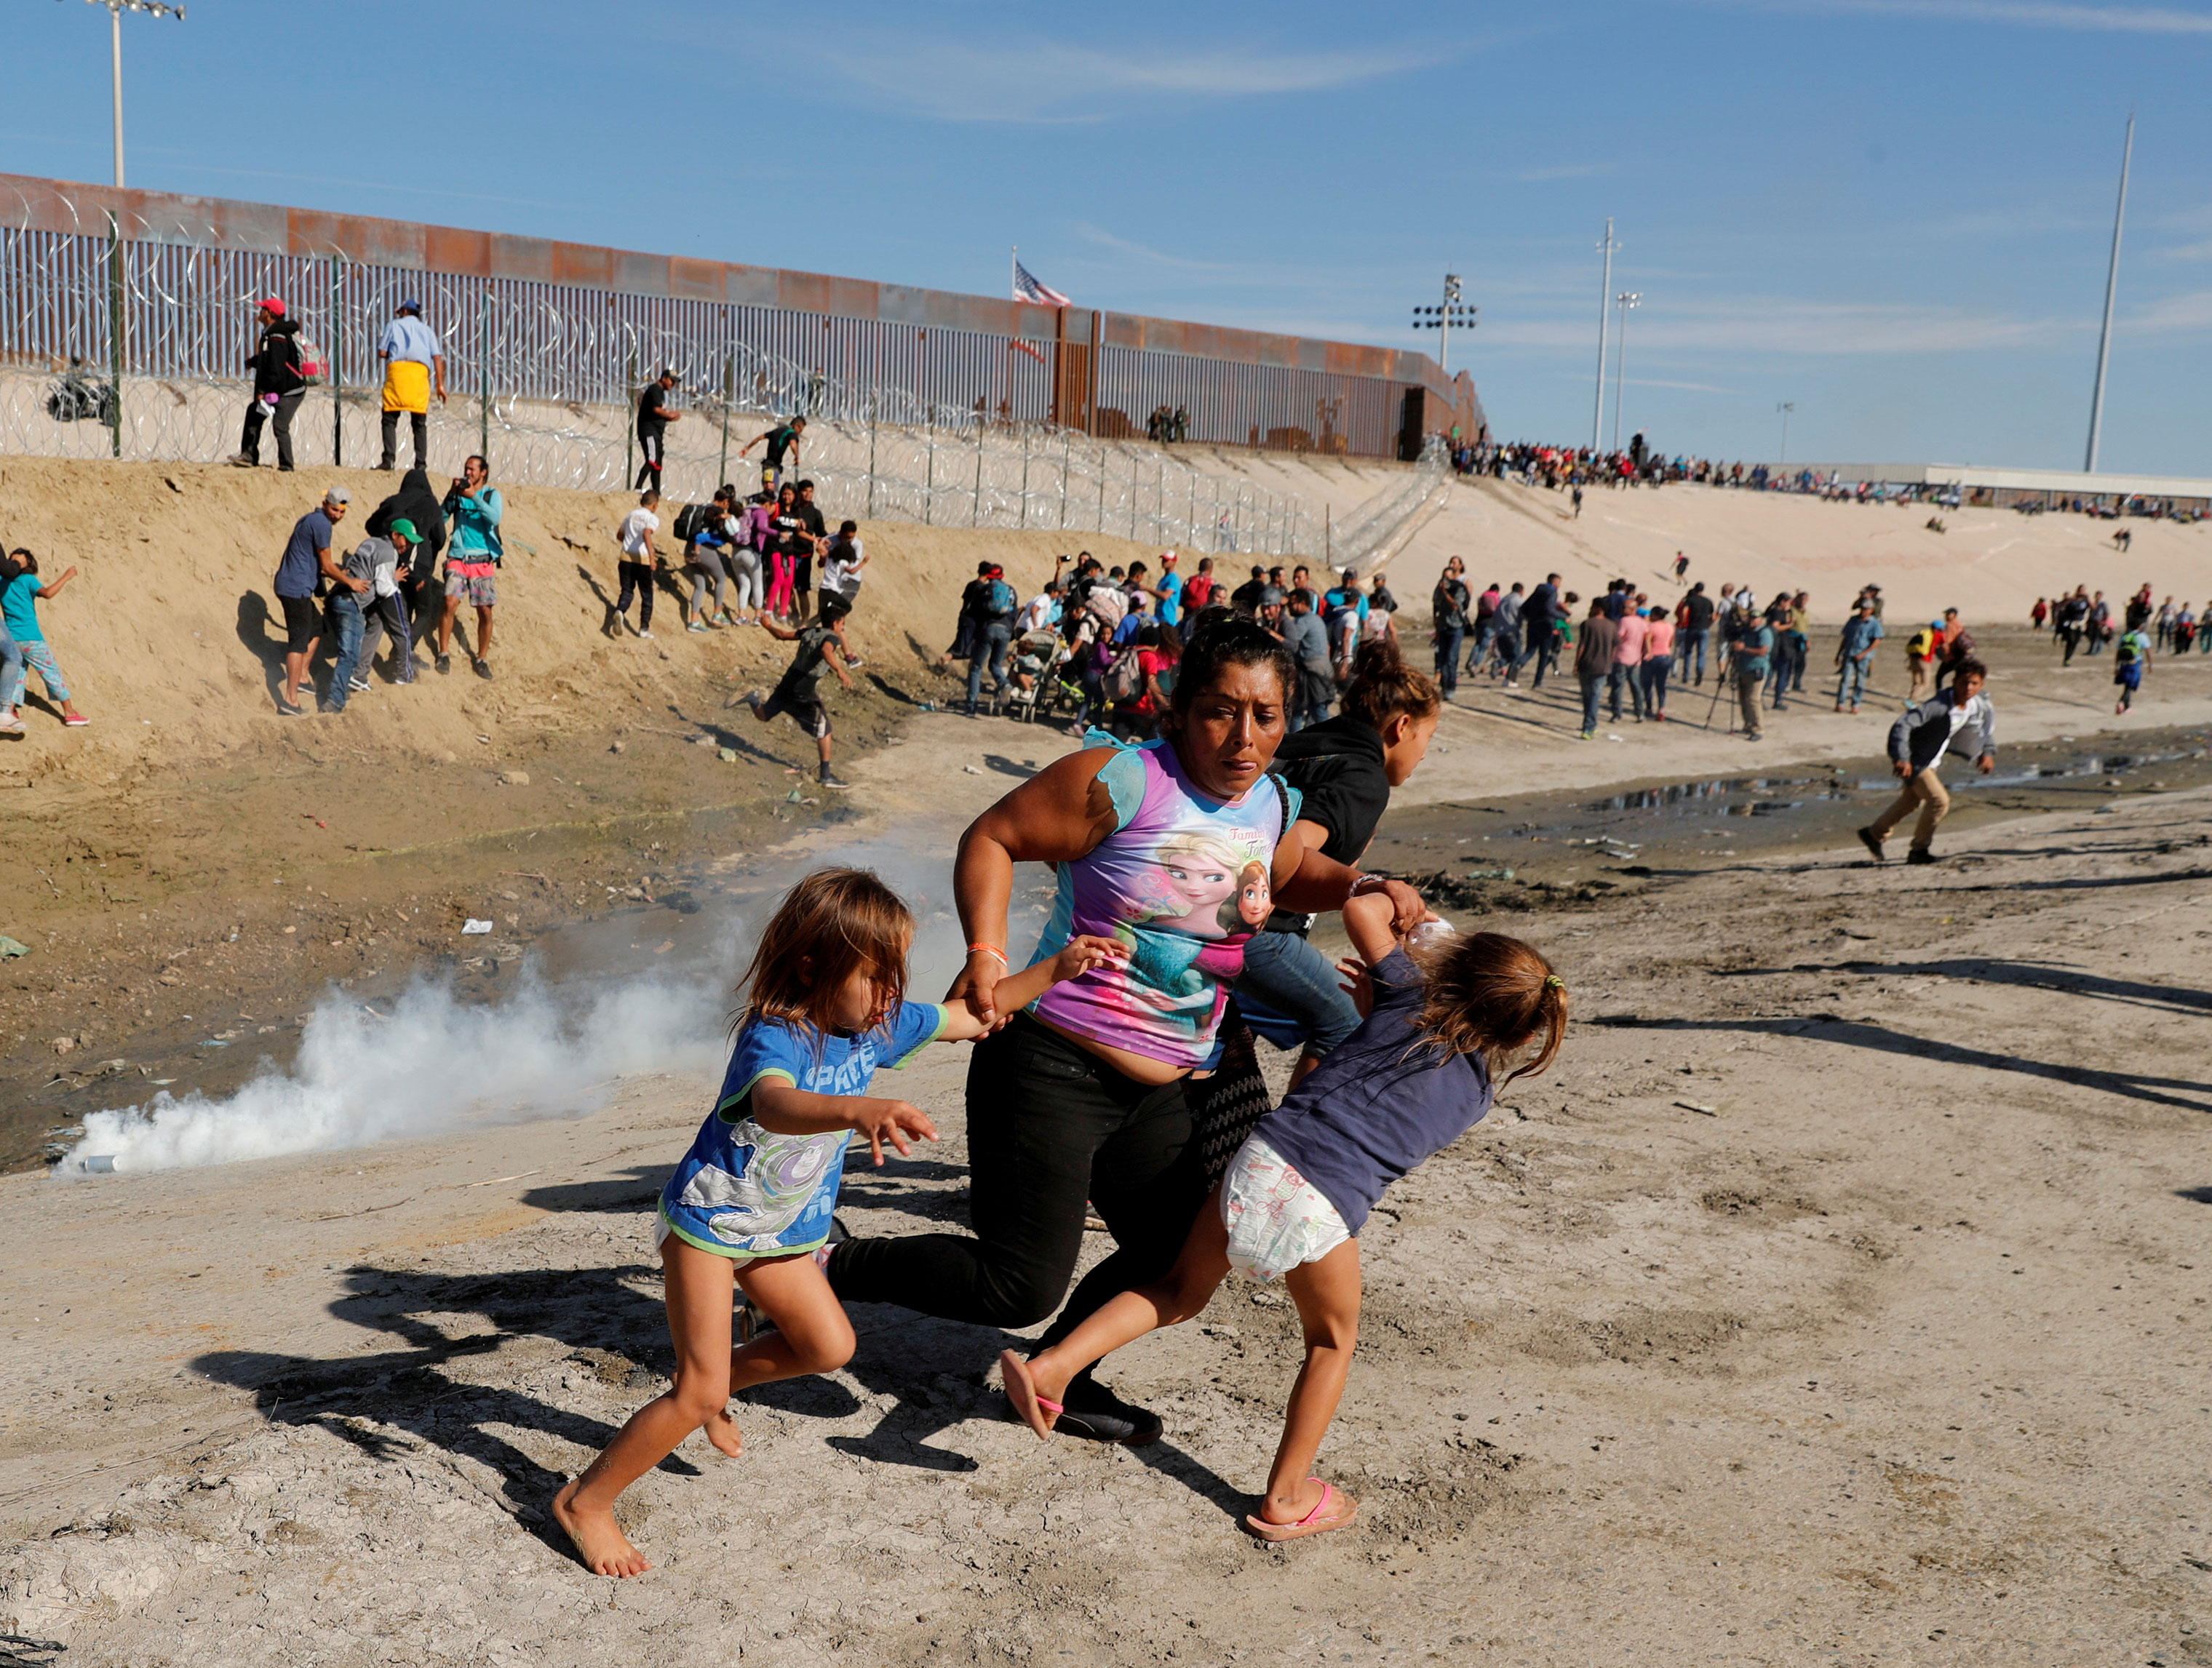 Castro runs away from tear gas with her five-year-old twin daughters Sayra Mavet Mejia Meza, left, and Cheyli Nallely Mejia Meza, right, in front of the border wall in Tijuana, Mexico, on Nov. 25, 2018. (Kim Kyung-Hoon—Reuters)